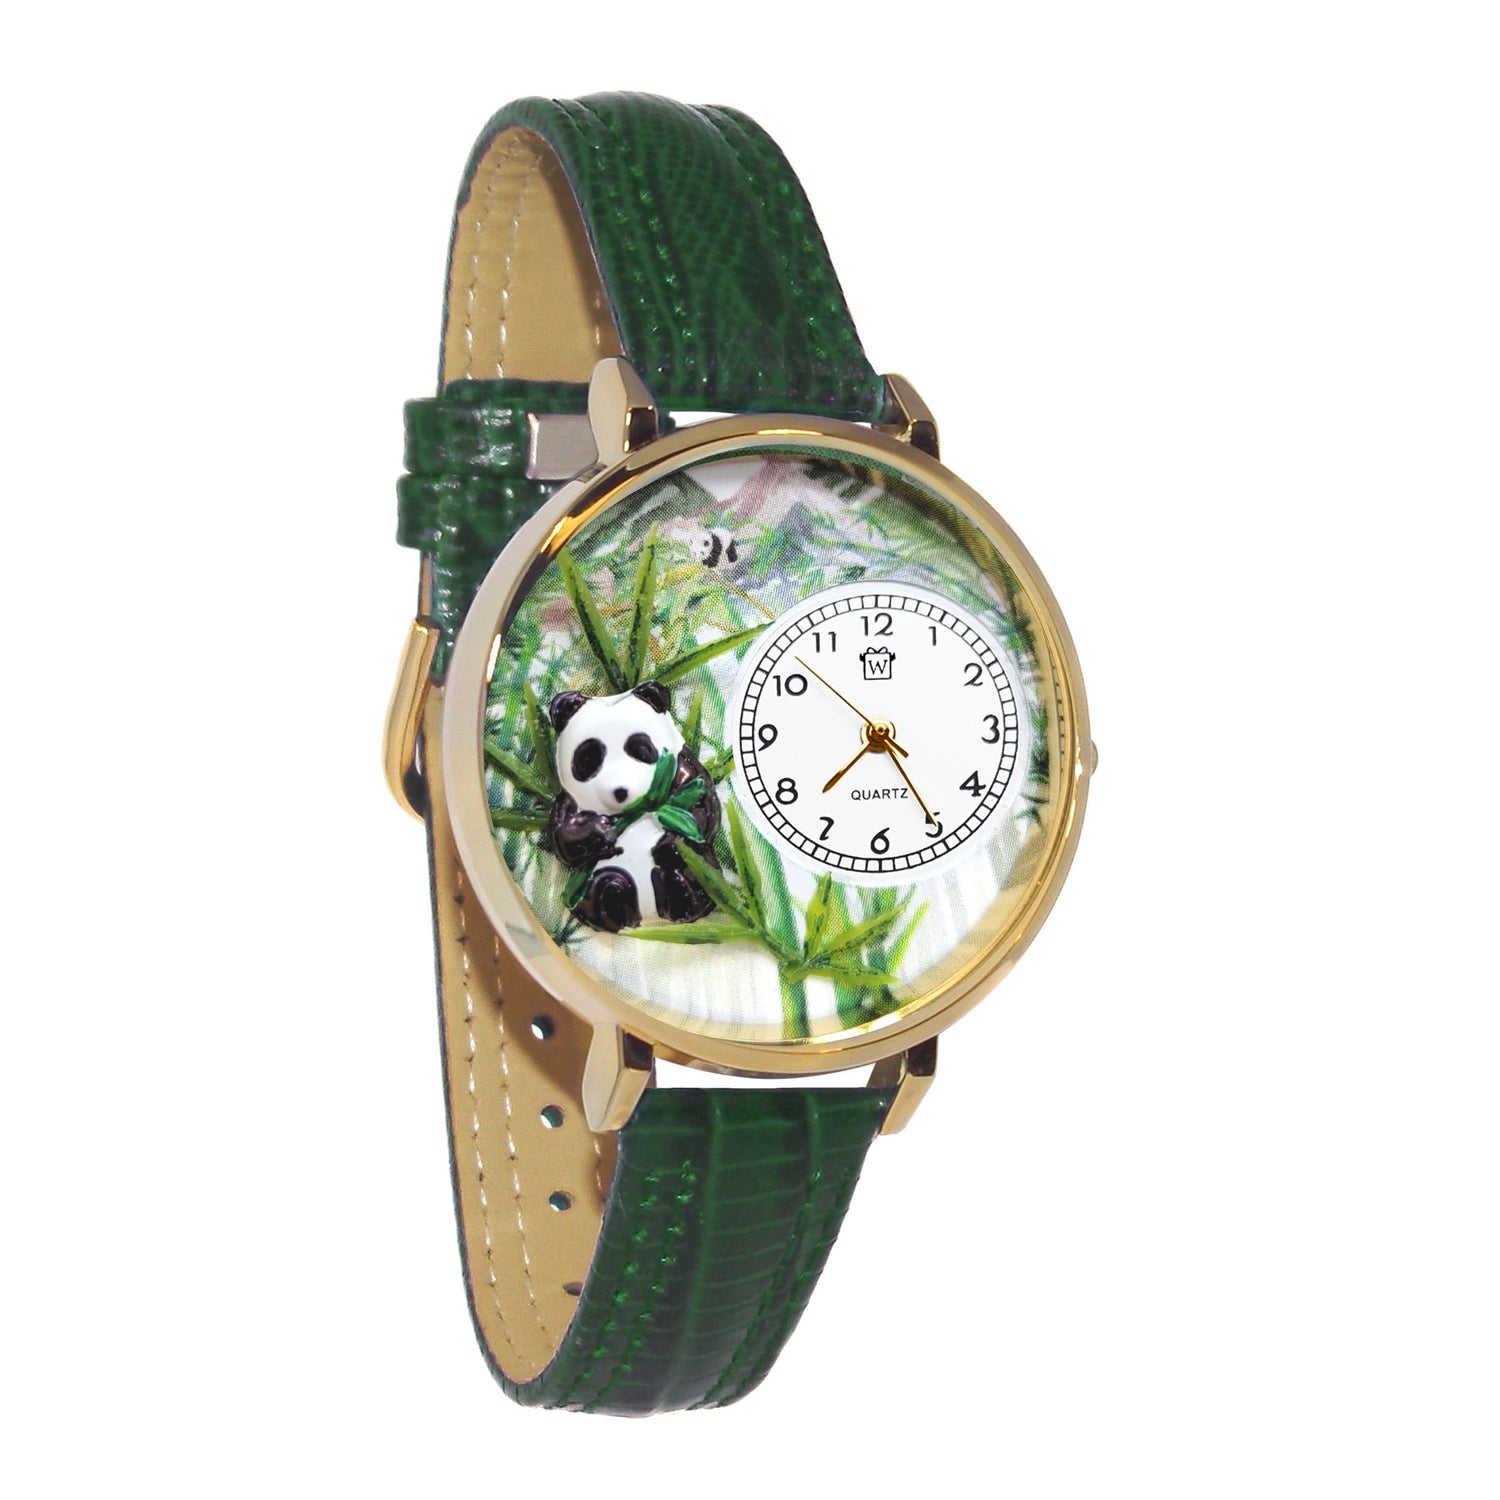 Whimsical Gifts | Panda 3D Watch Large Style | Handmade in USA | Animal Lover | Zoo & Sealife | Novelty Unique Fun Miniatures Gift | Gold Finish Green Leather Watch Band